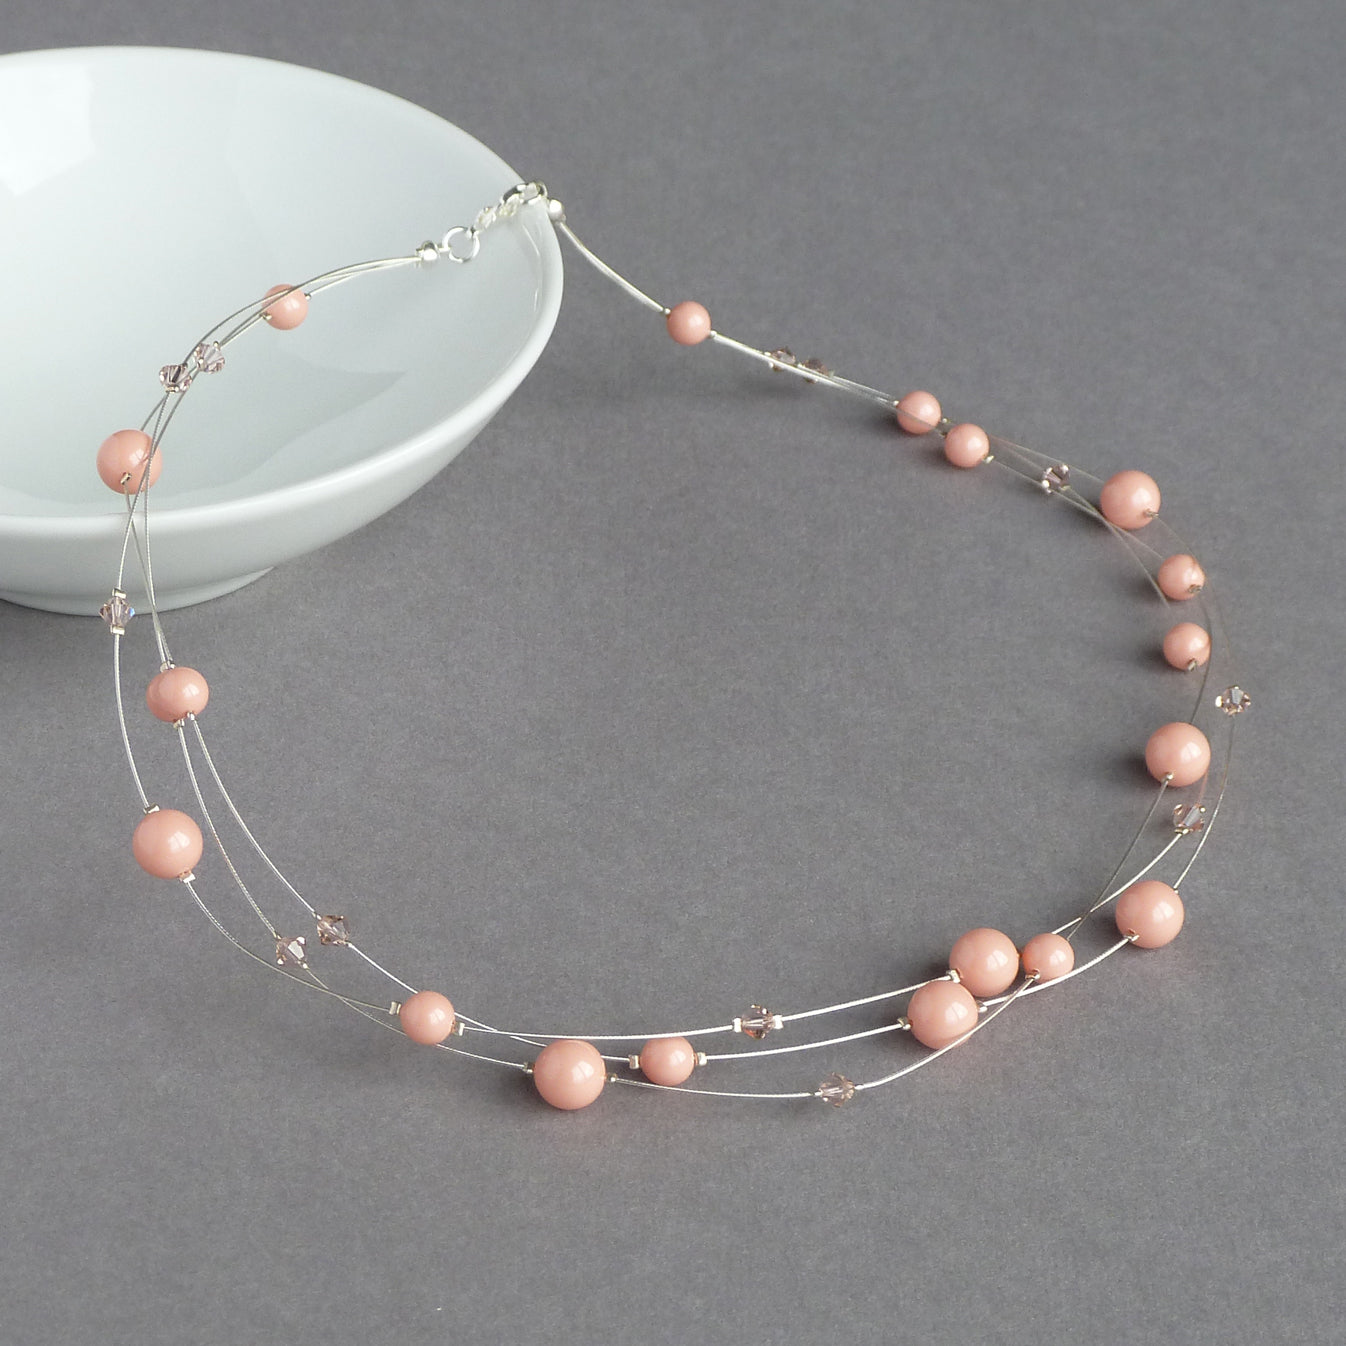 Coral pink floating pearl necklace